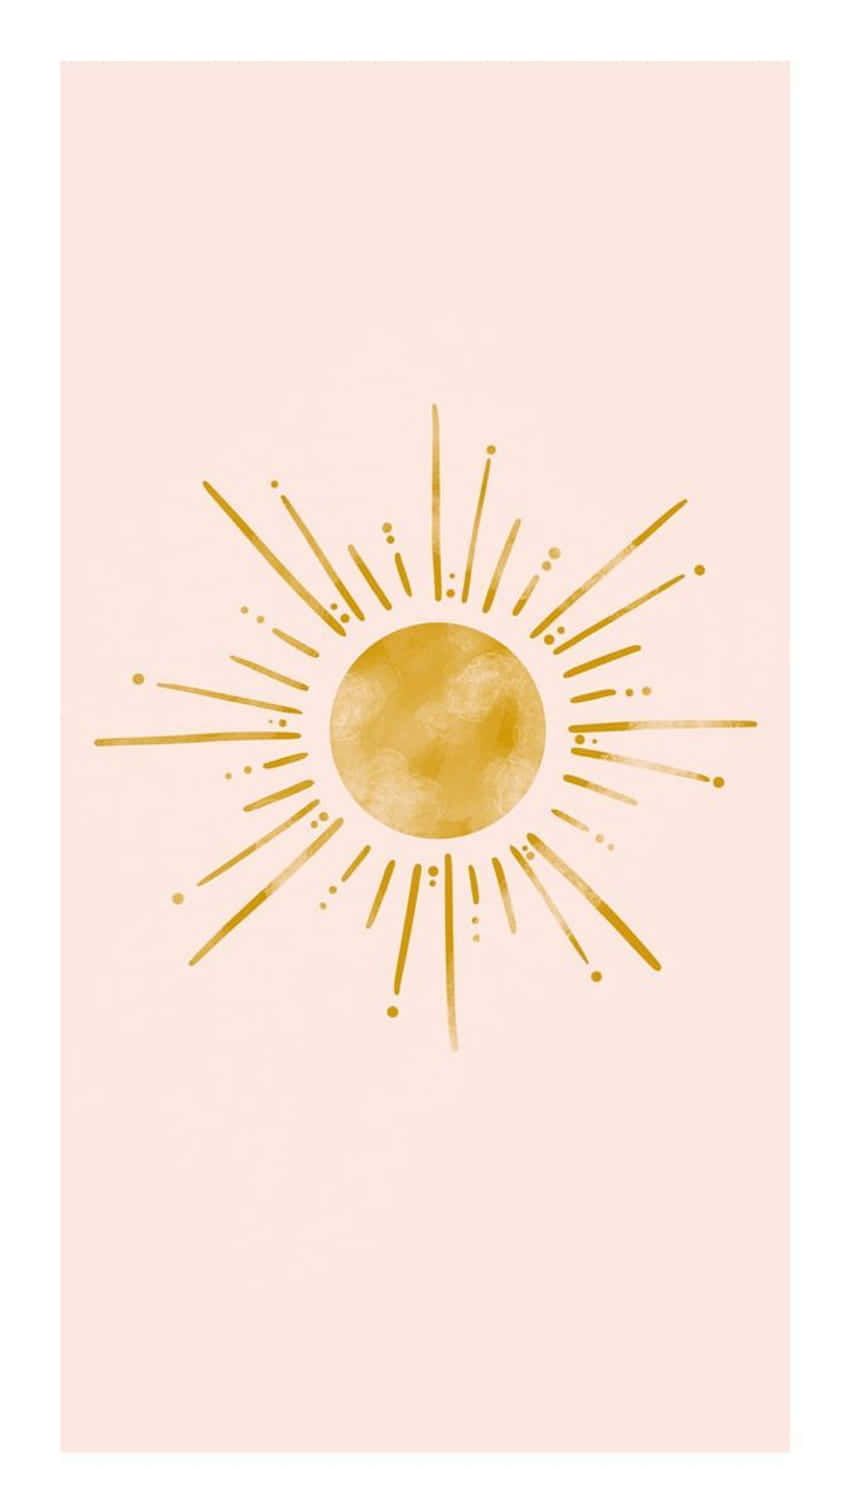 A watercolor painting of a sun on a pink background - Sun, sunshine